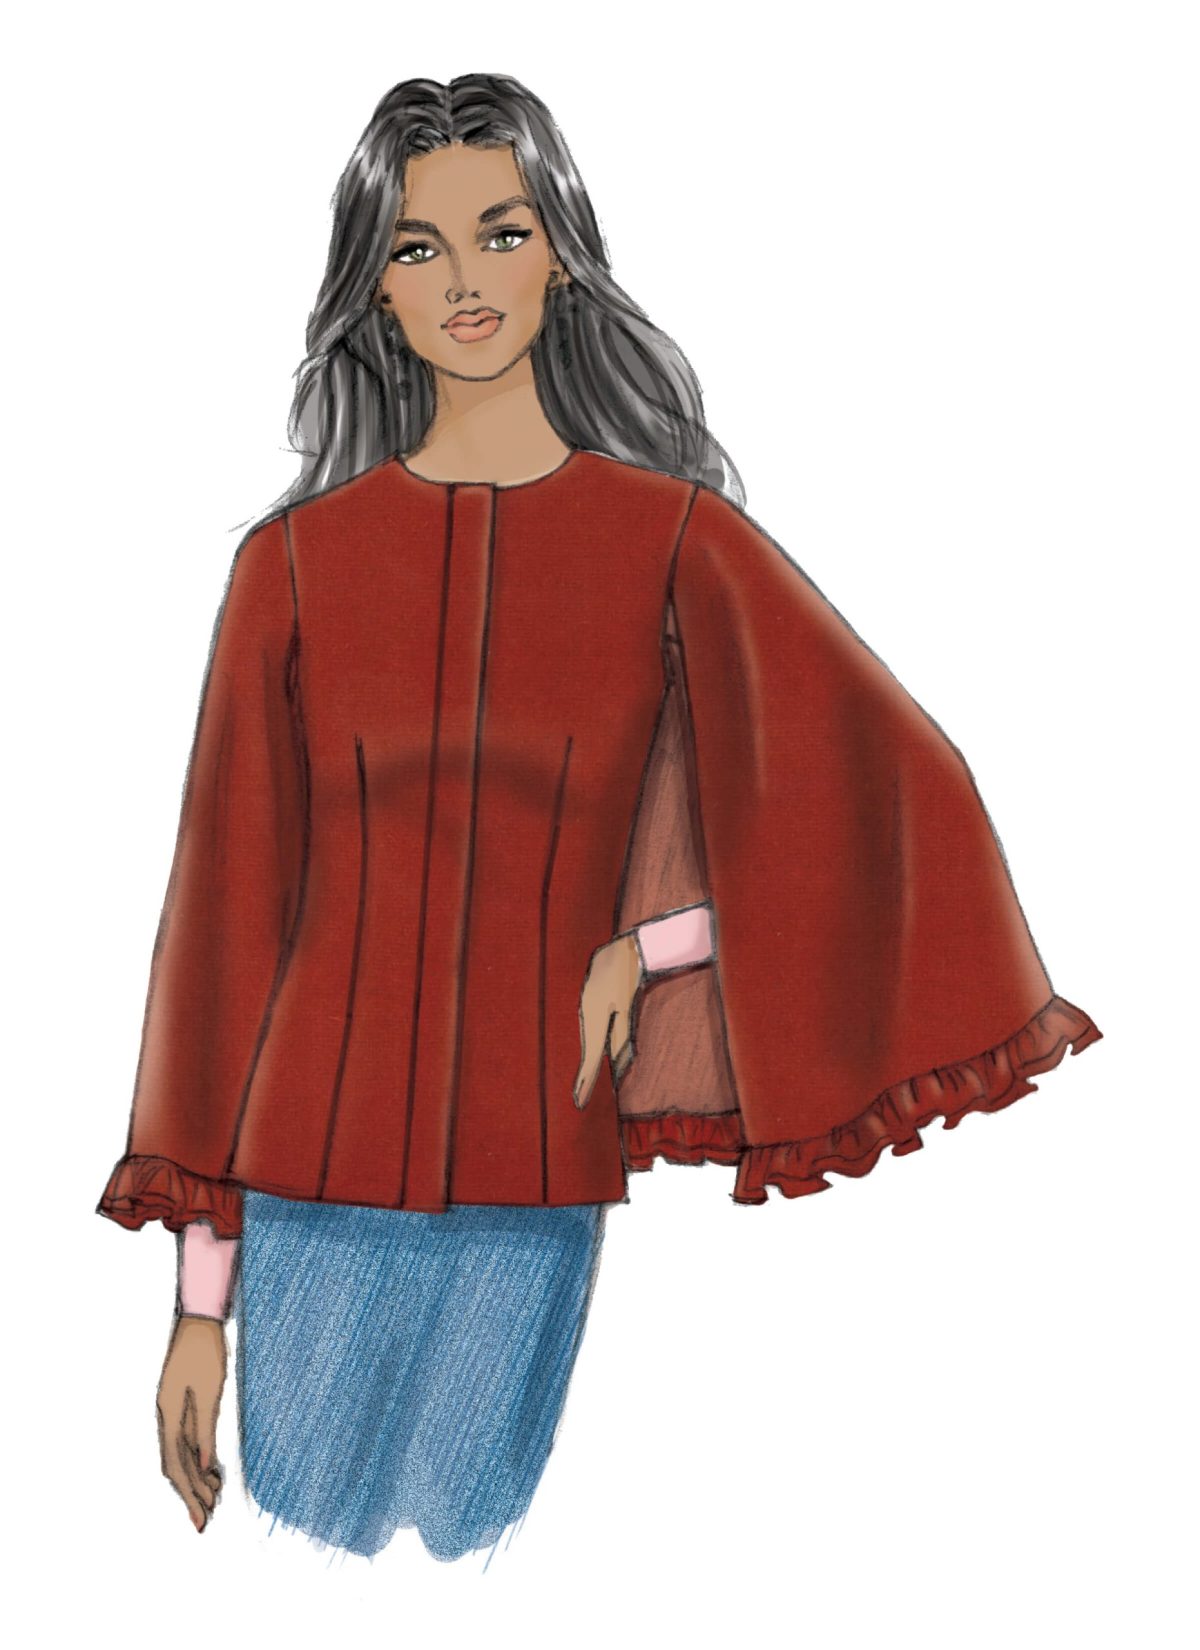 Butterick Sewing Pattern B6603 Misses' Cape